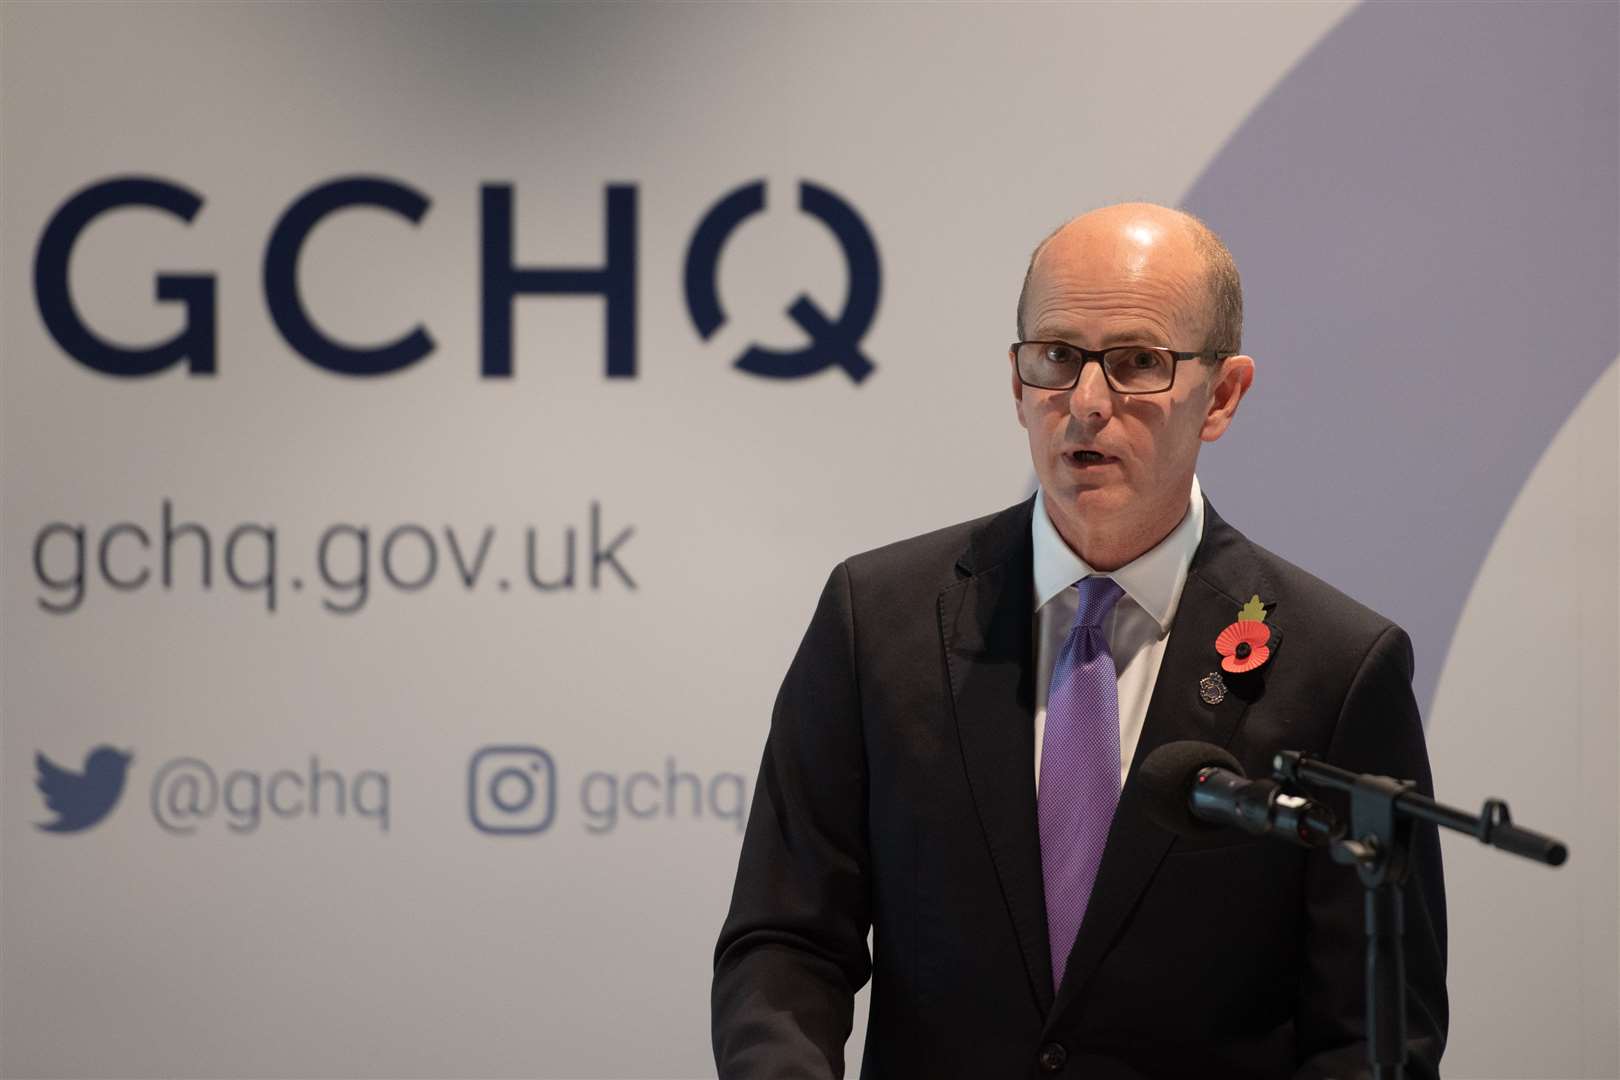 GCHQ director Jeremy Fleming says the agency is committed to ‘ethical use of AI’ (Joe Giddens/PA)